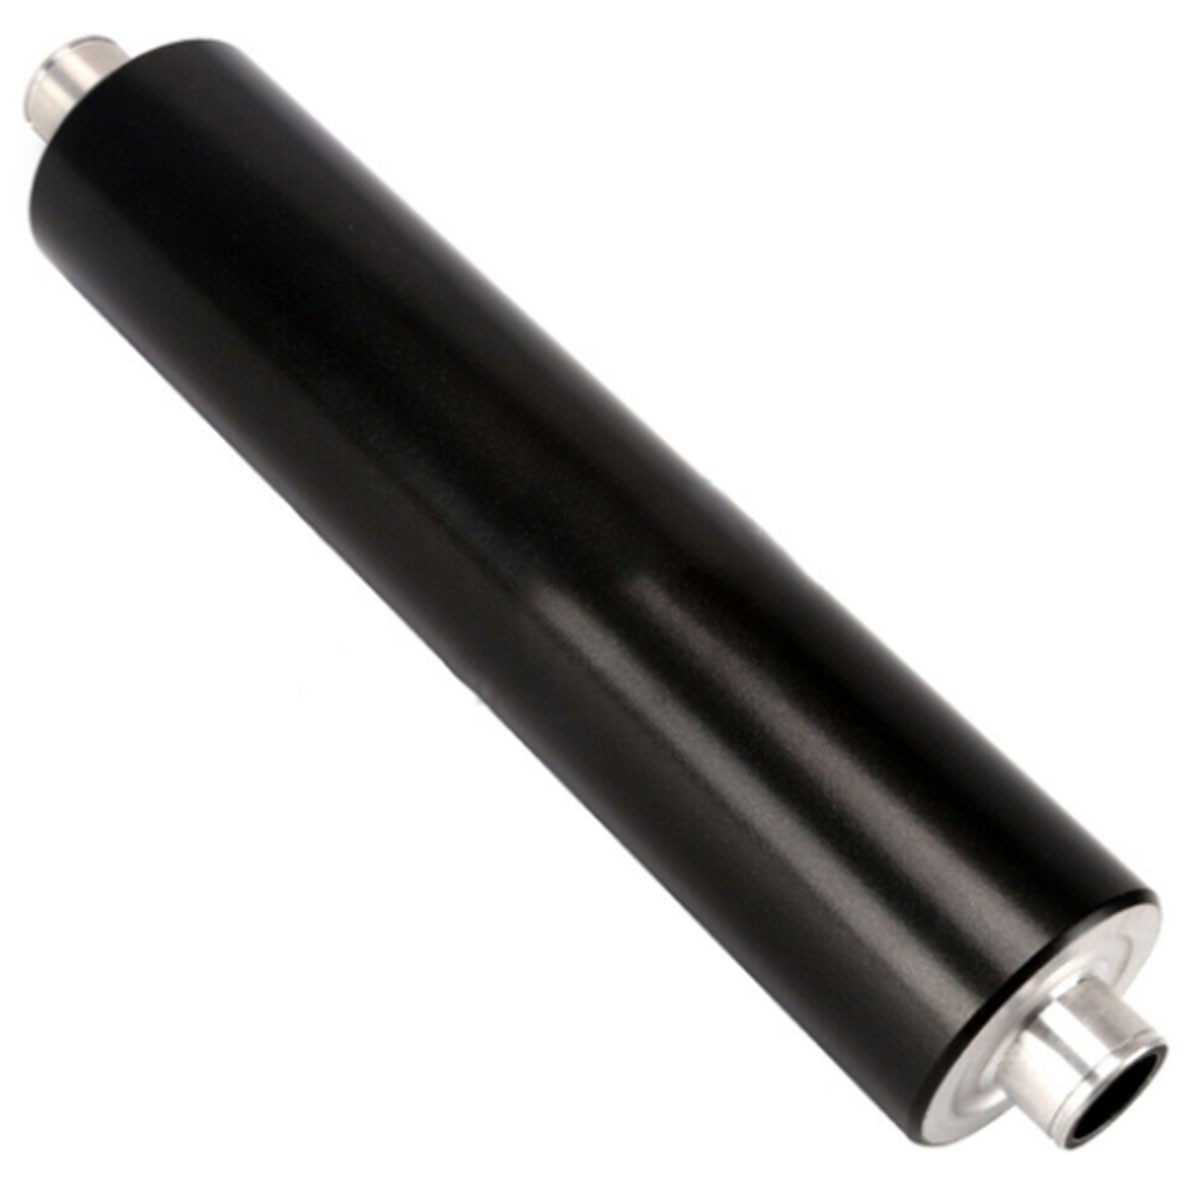 New Upper Fuser Heat Roller For Ricoh Pro 907 1107 1357 MP 9000 - Click Image to Close